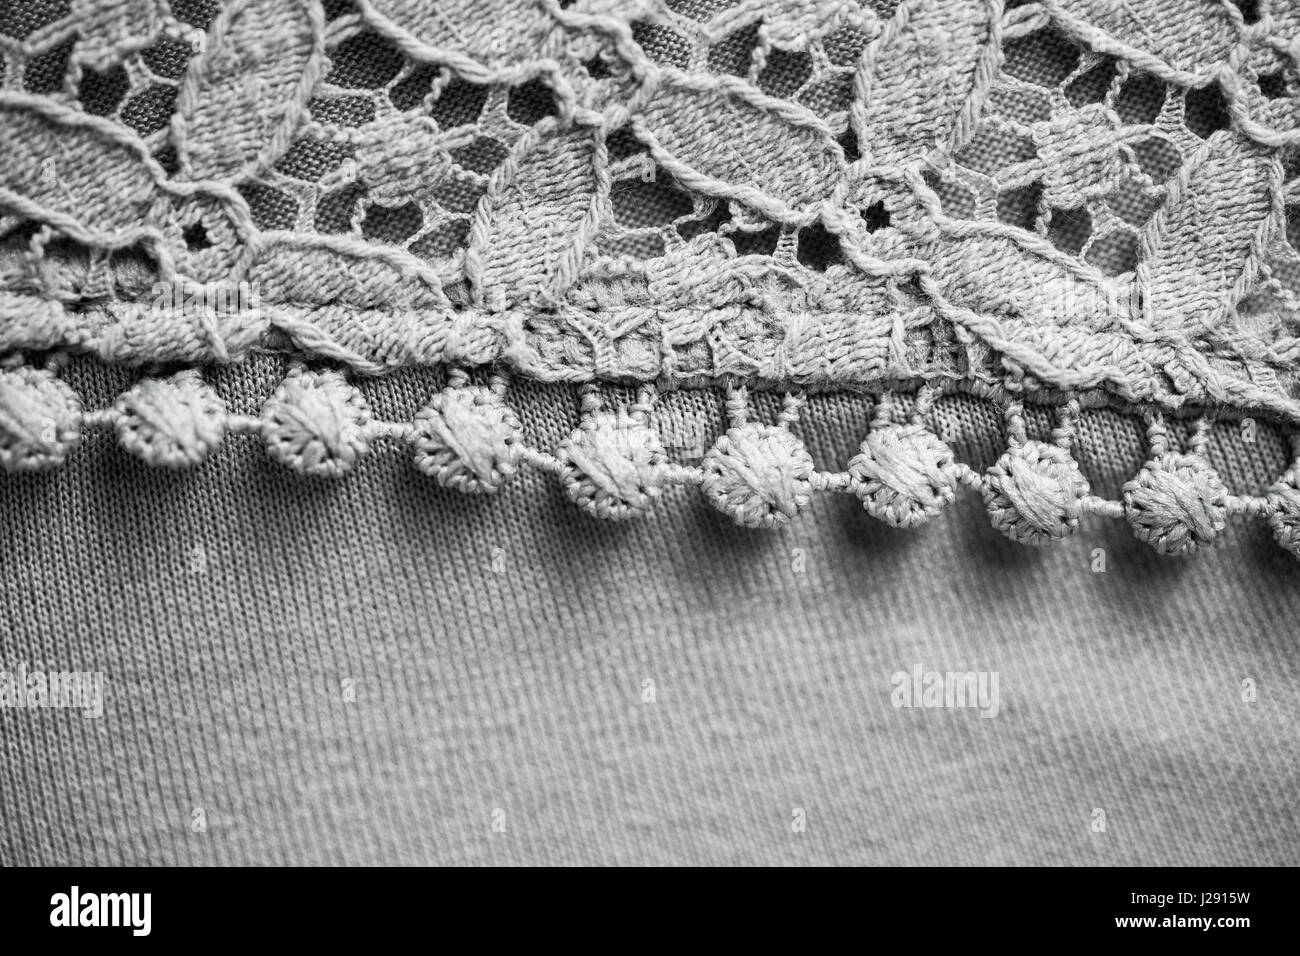 close up of lace textile or clothing item Stock Photo